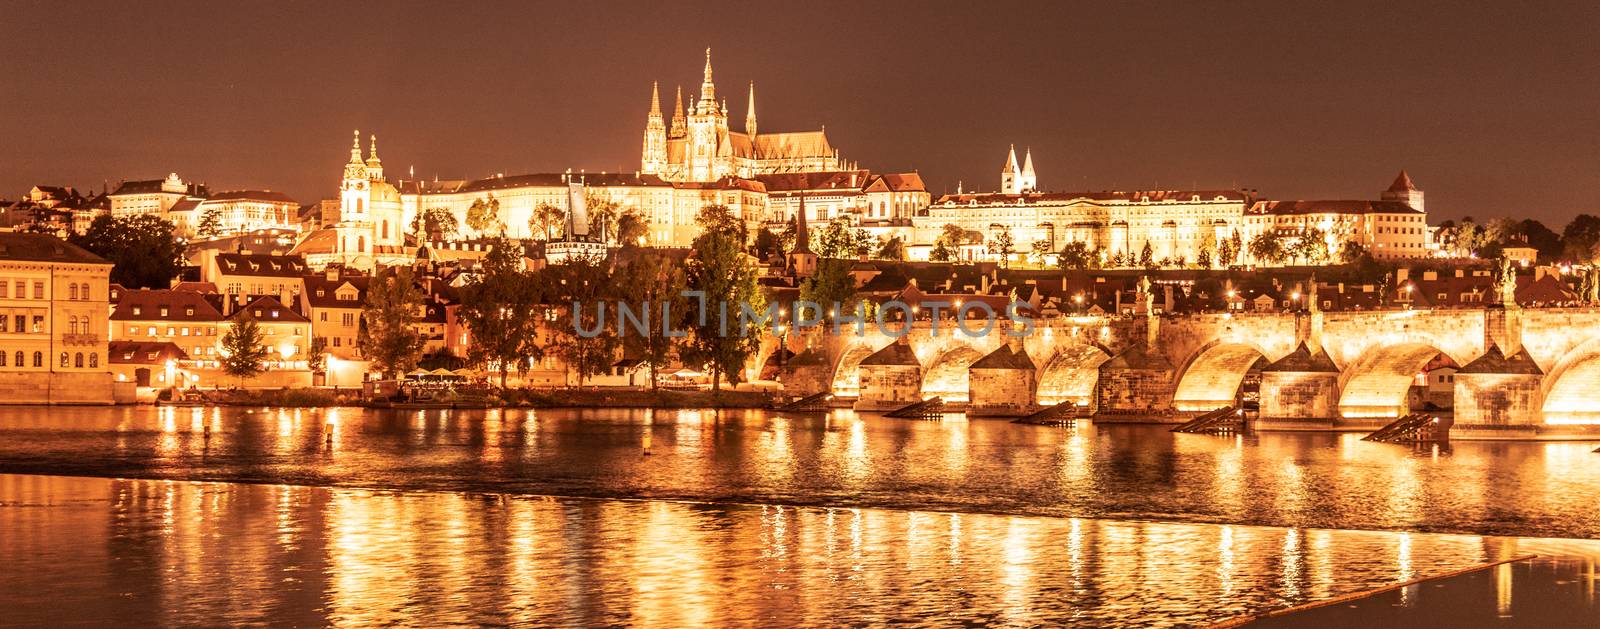 Golden Prague by night. Prague Castle and Charles Bridge reflected in Vltava River. View from Smetana Embankment. Praha, Czech Republic by pyty